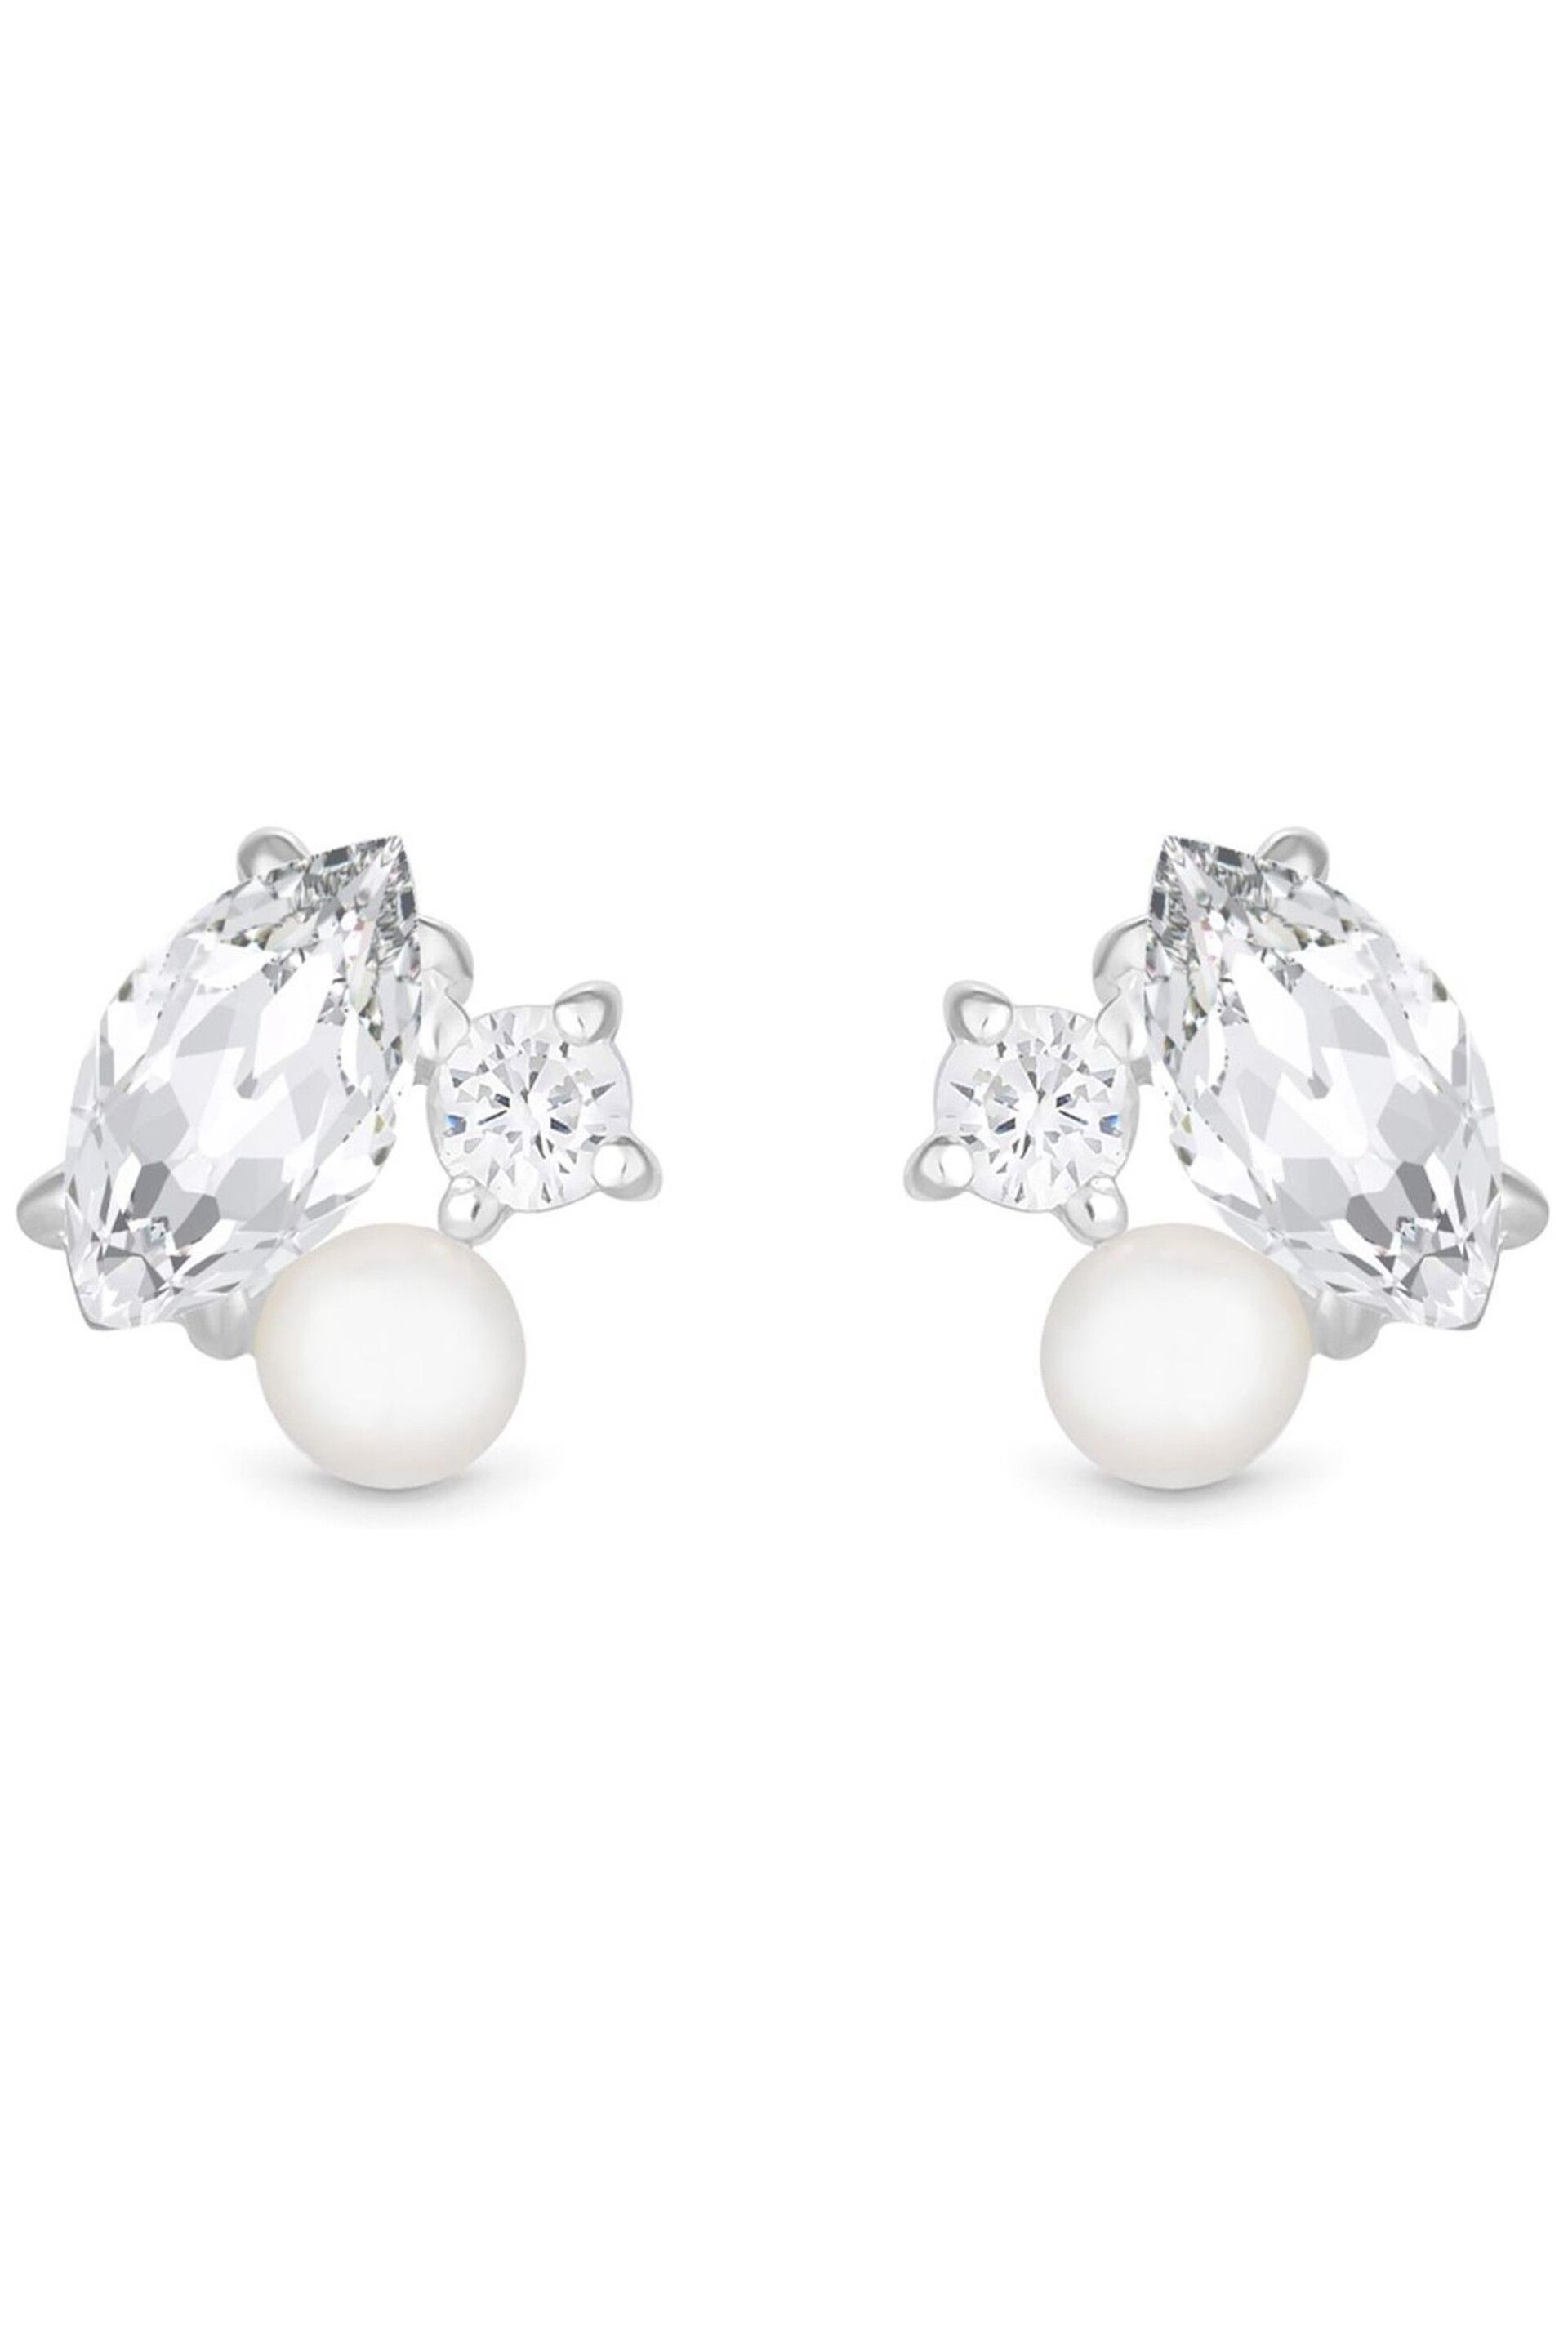 Simply Silver Silver Tone Cubic Zirconia And Freshwater Pearl Multi Stone Stud Earrings - Image 2 of 2